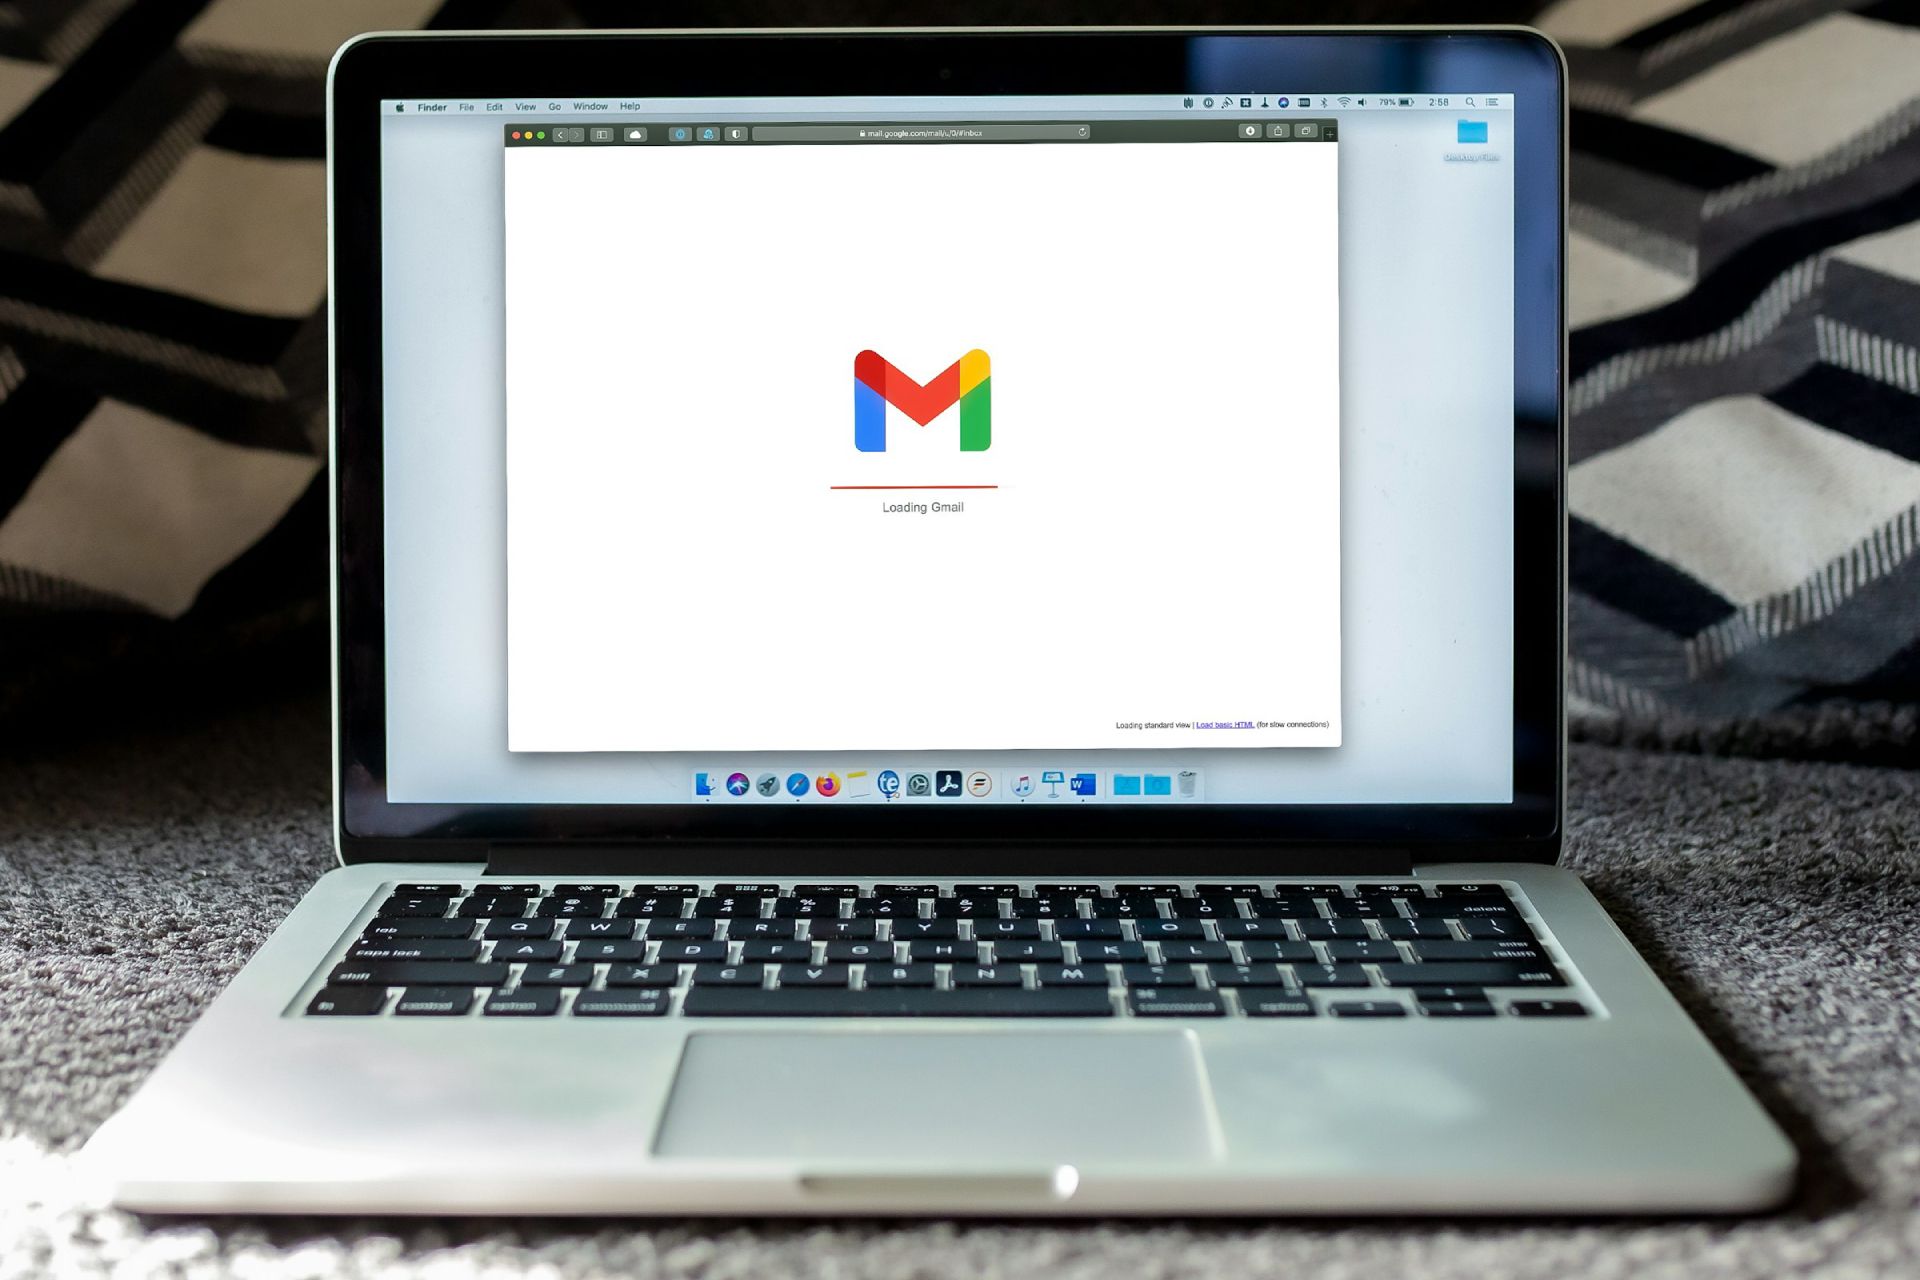 Gmail app launches on a laptop